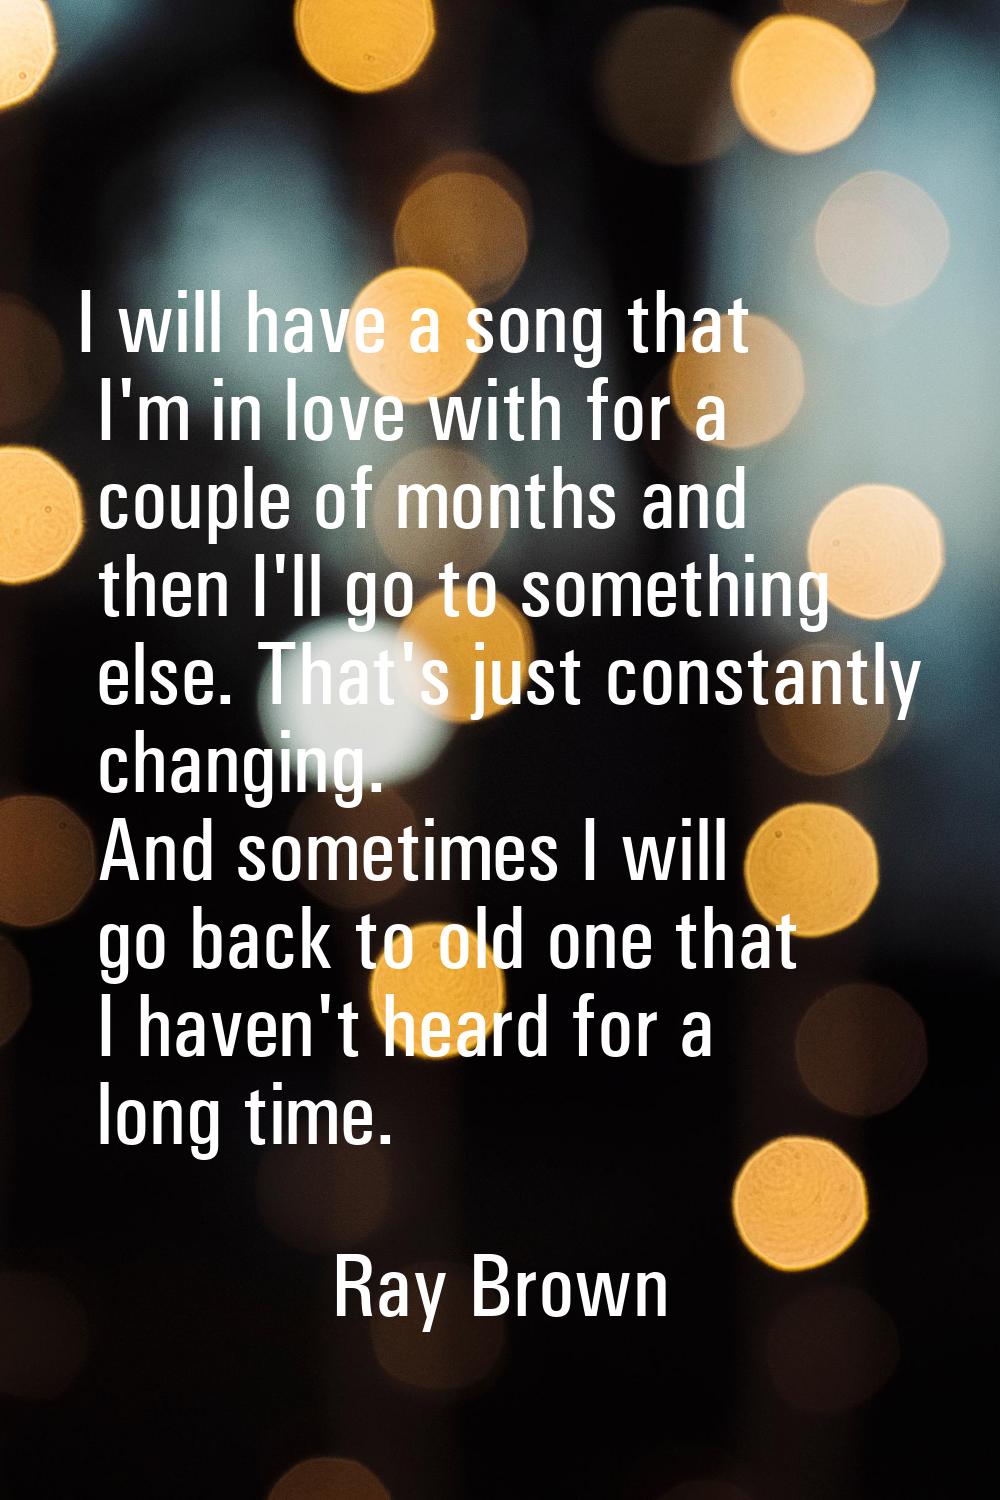 I will have a song that I'm in love with for a couple of months and then I'll go to something else.